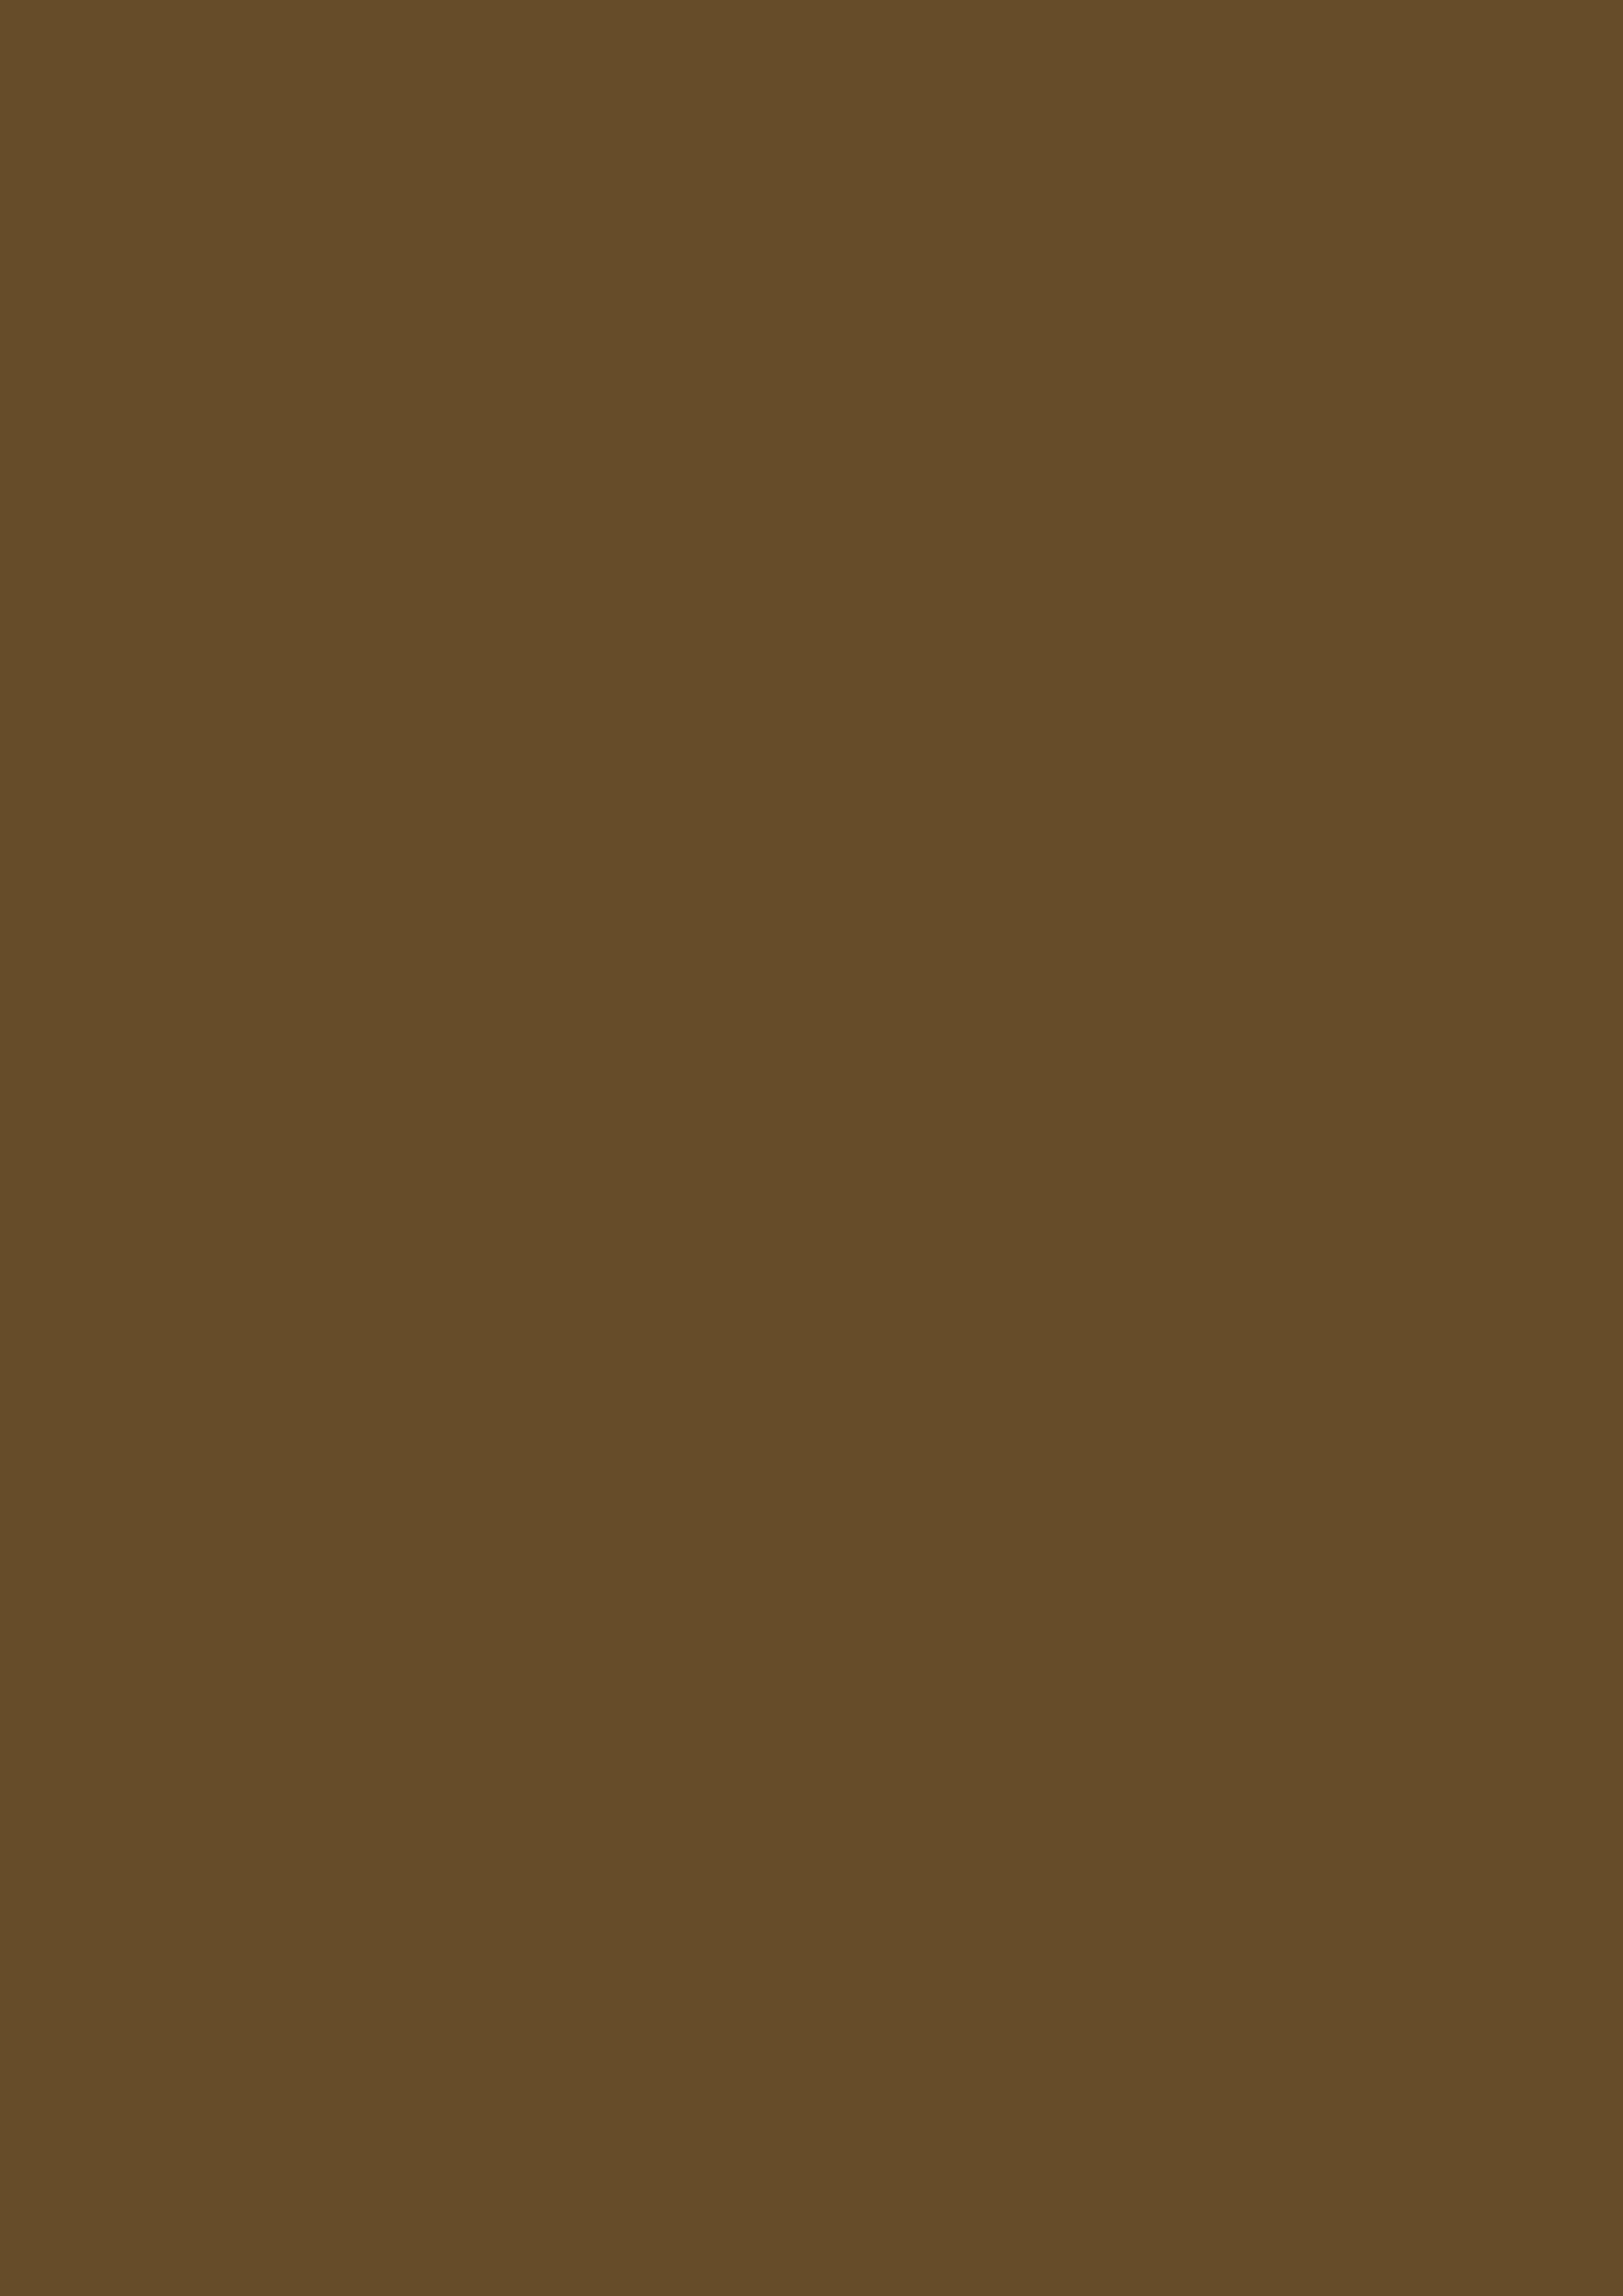 2480x3508 Donkey Brown Solid Color Background